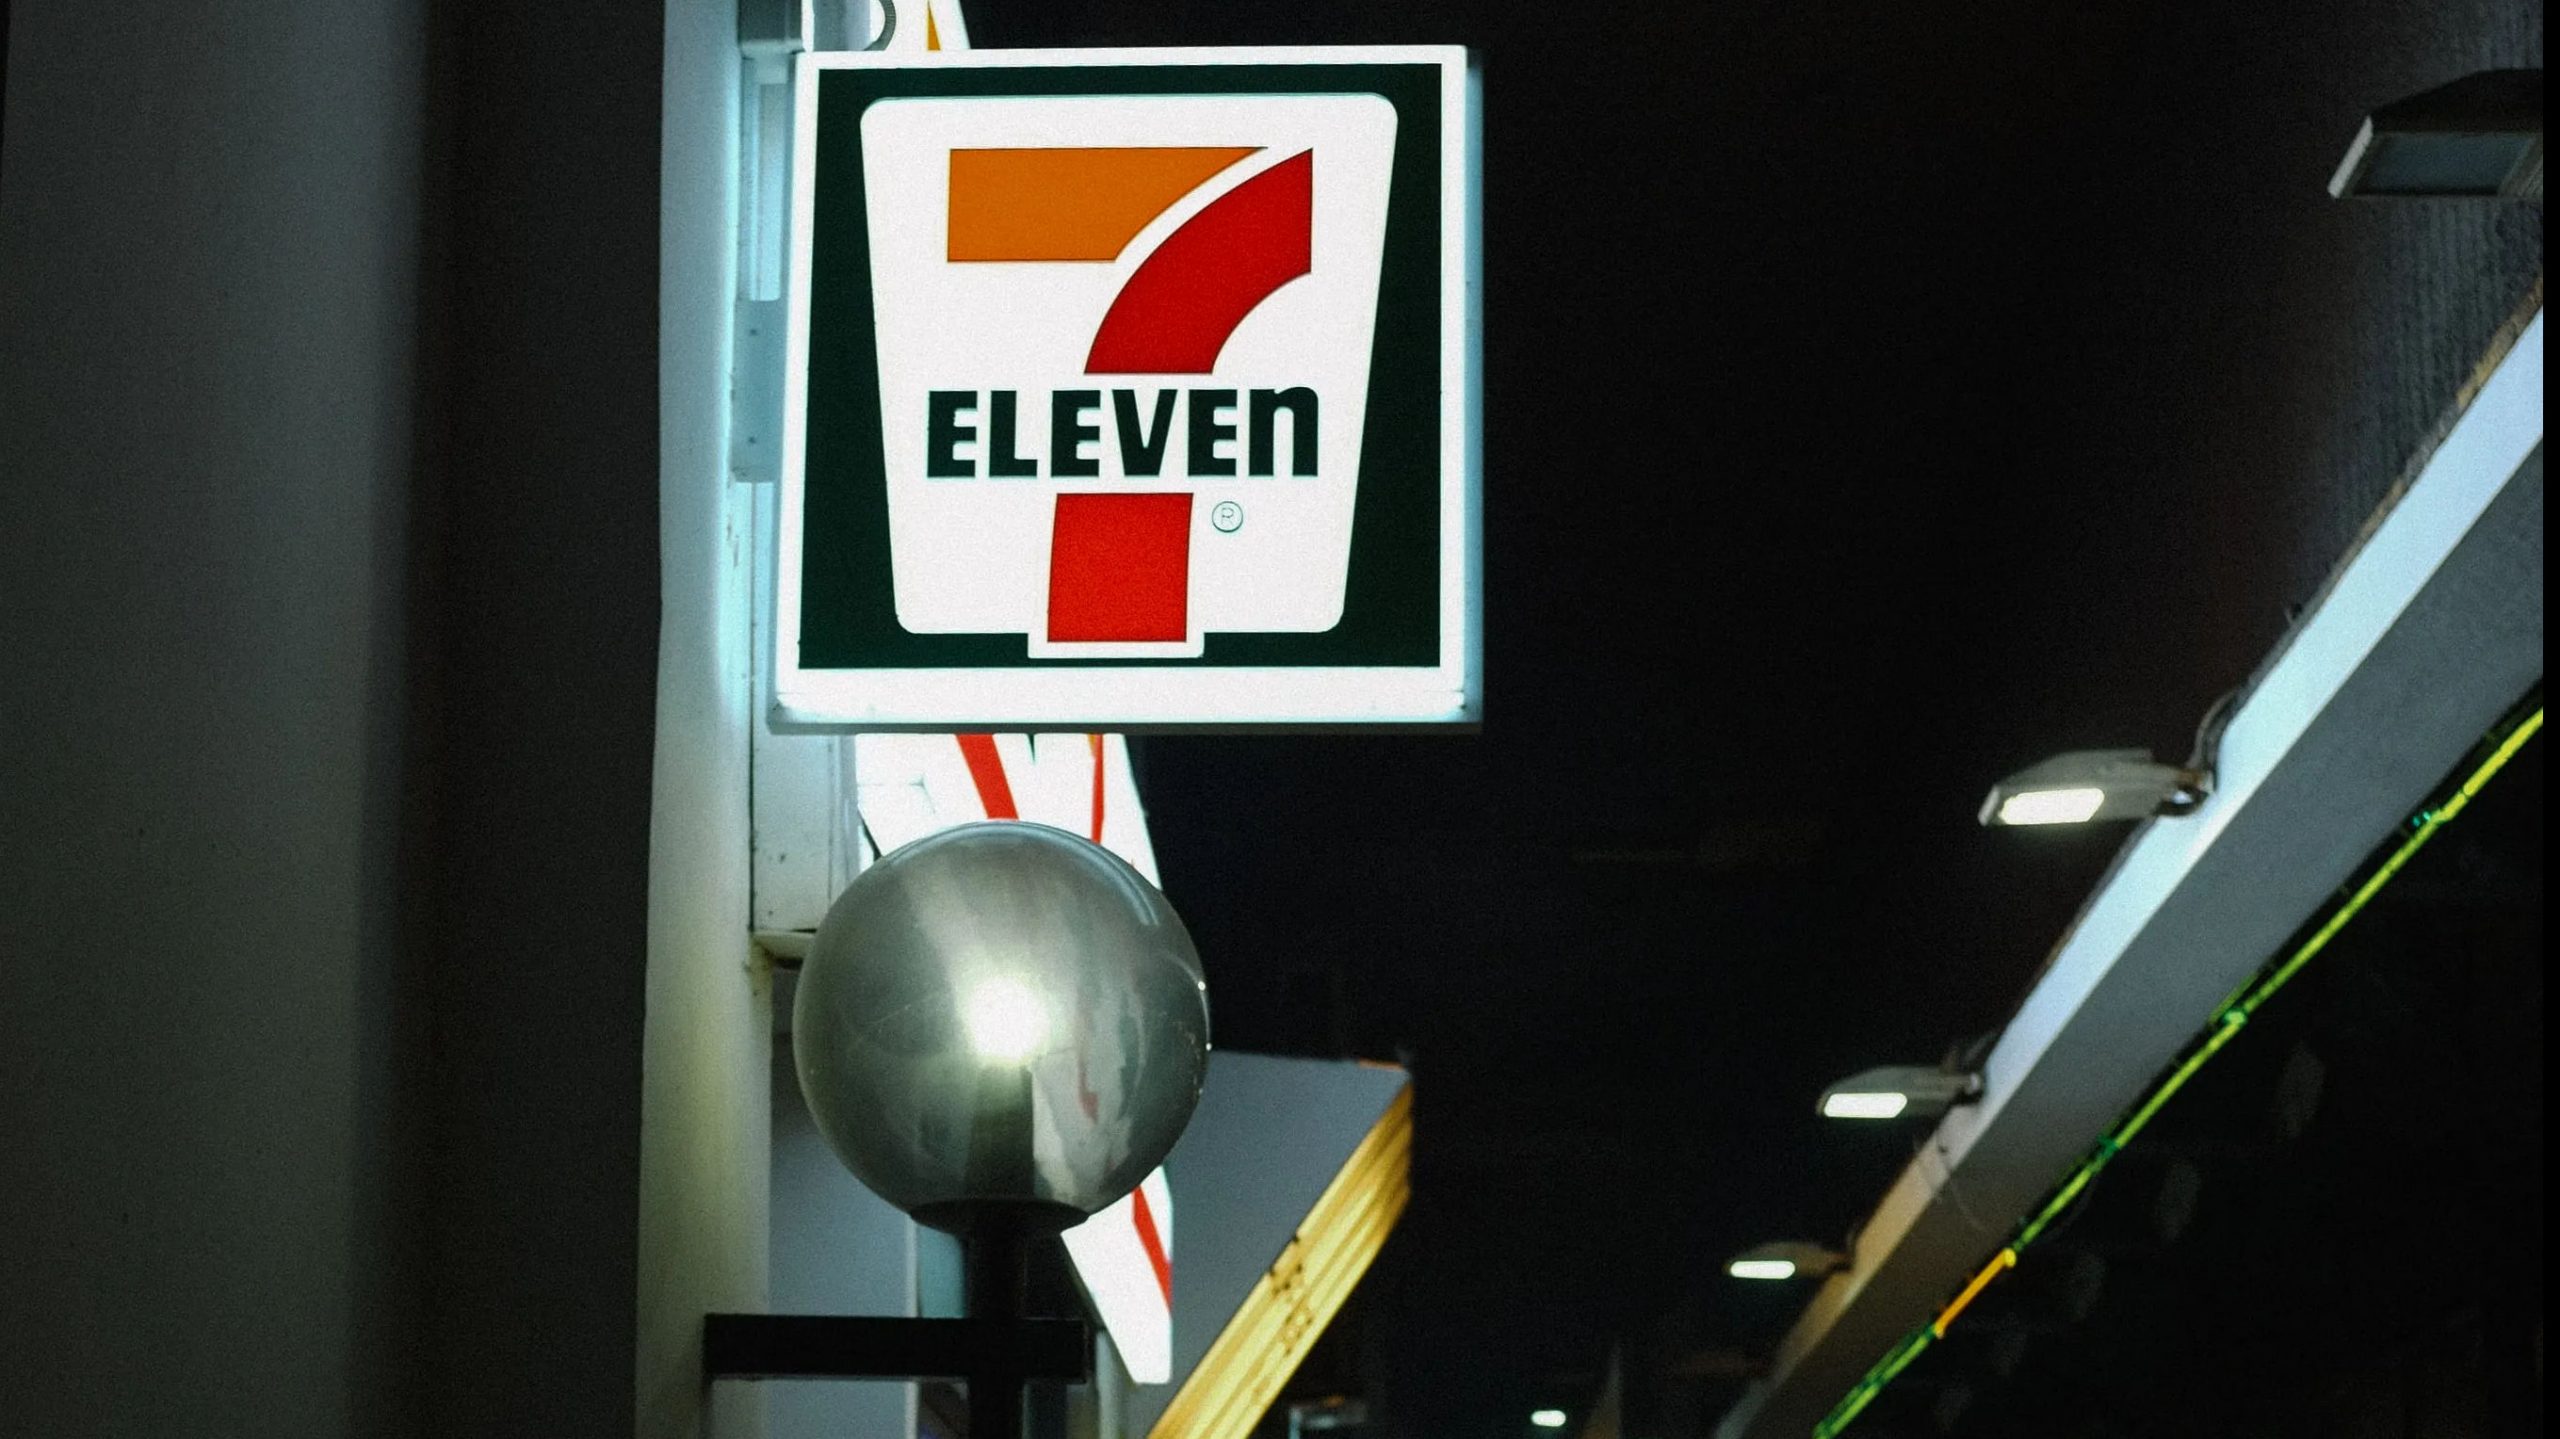 Reliance Retail to open 7-Eleven outlets in India, first one to come up in Mumbai